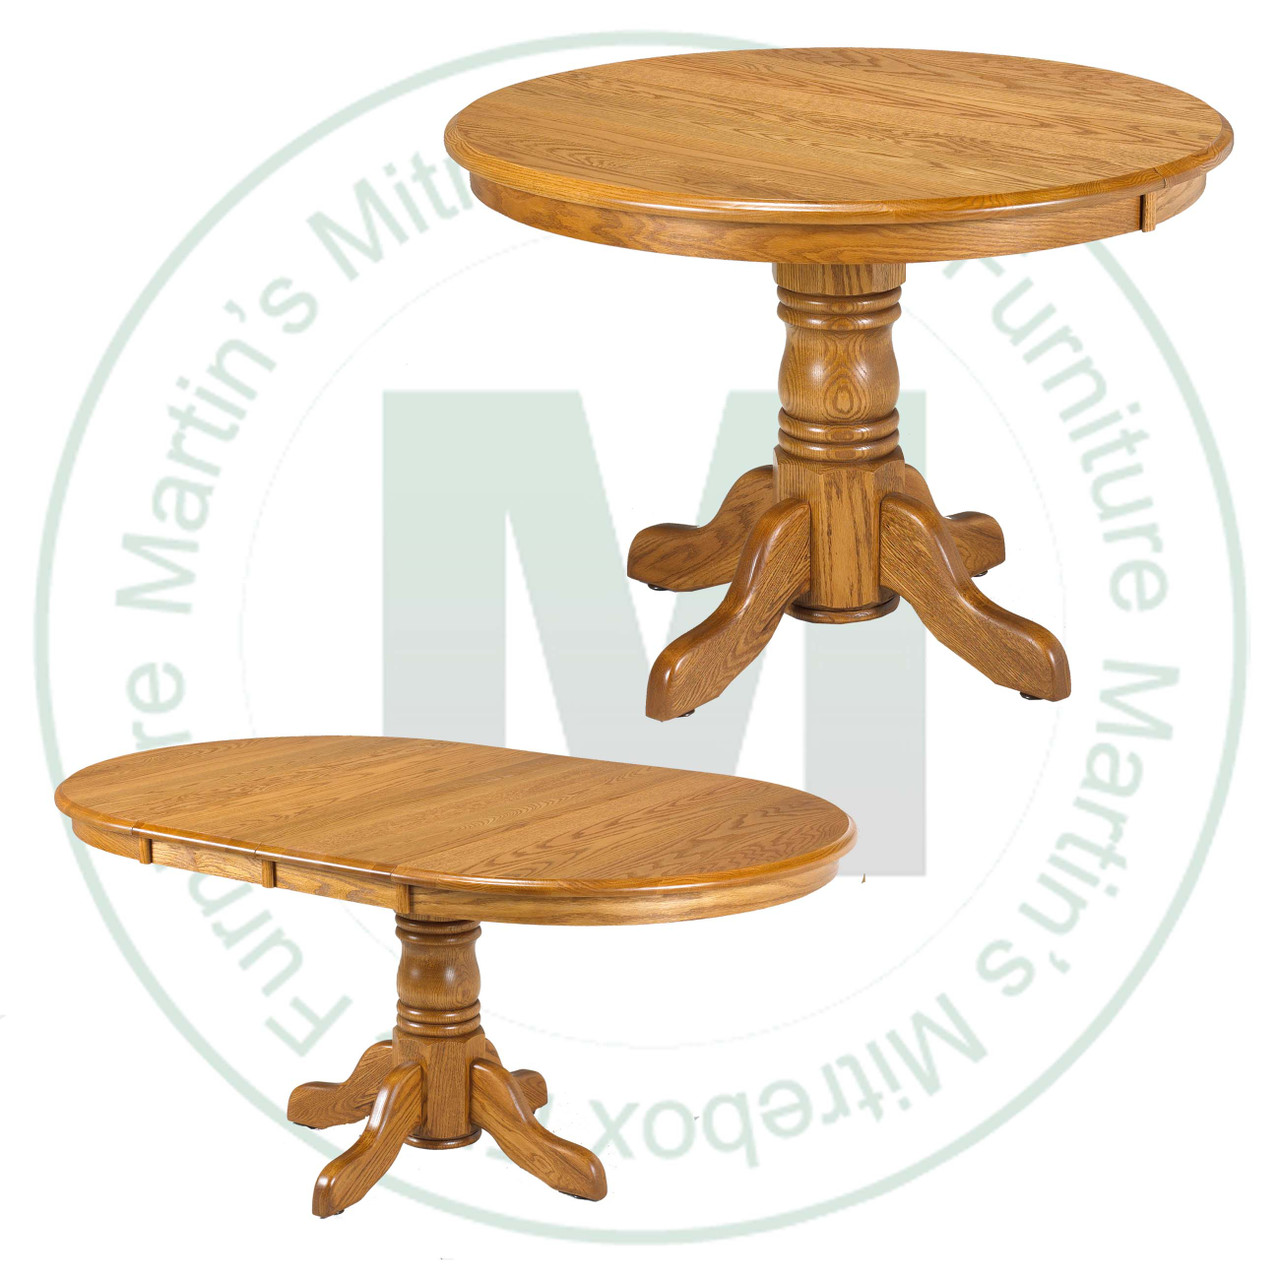 Wormy Maple Lancaster Collection Single Pedestal Table 42''D x 42''W x 30''H With 2 - 12'' Leaves. Table Has 1.25'' Thick Top